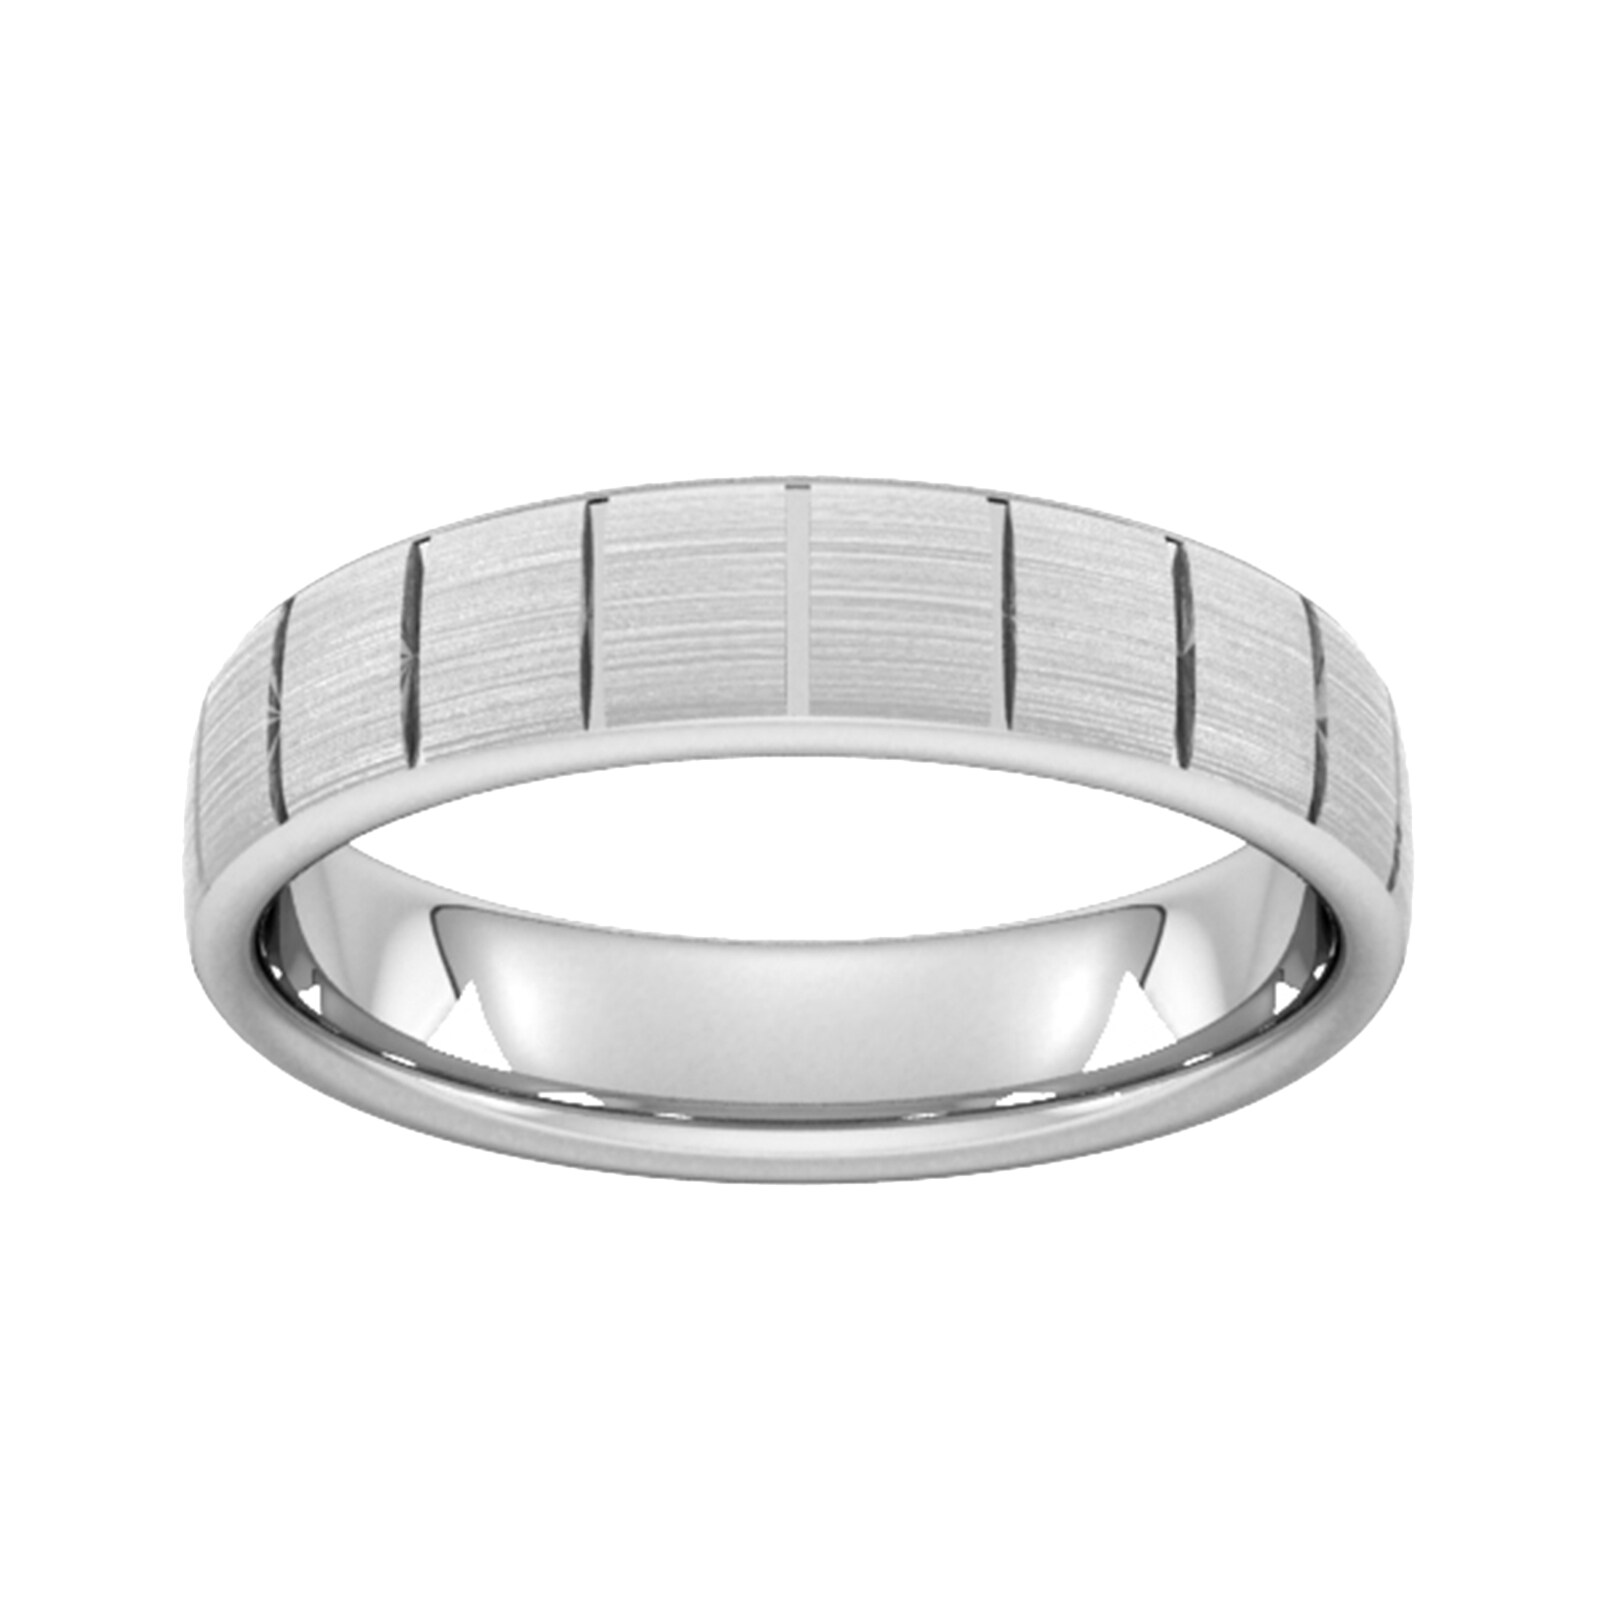 5mm Slight Court Standard Vertical Lines Wedding Ring In 9 Carat White Gold - Ring Size N